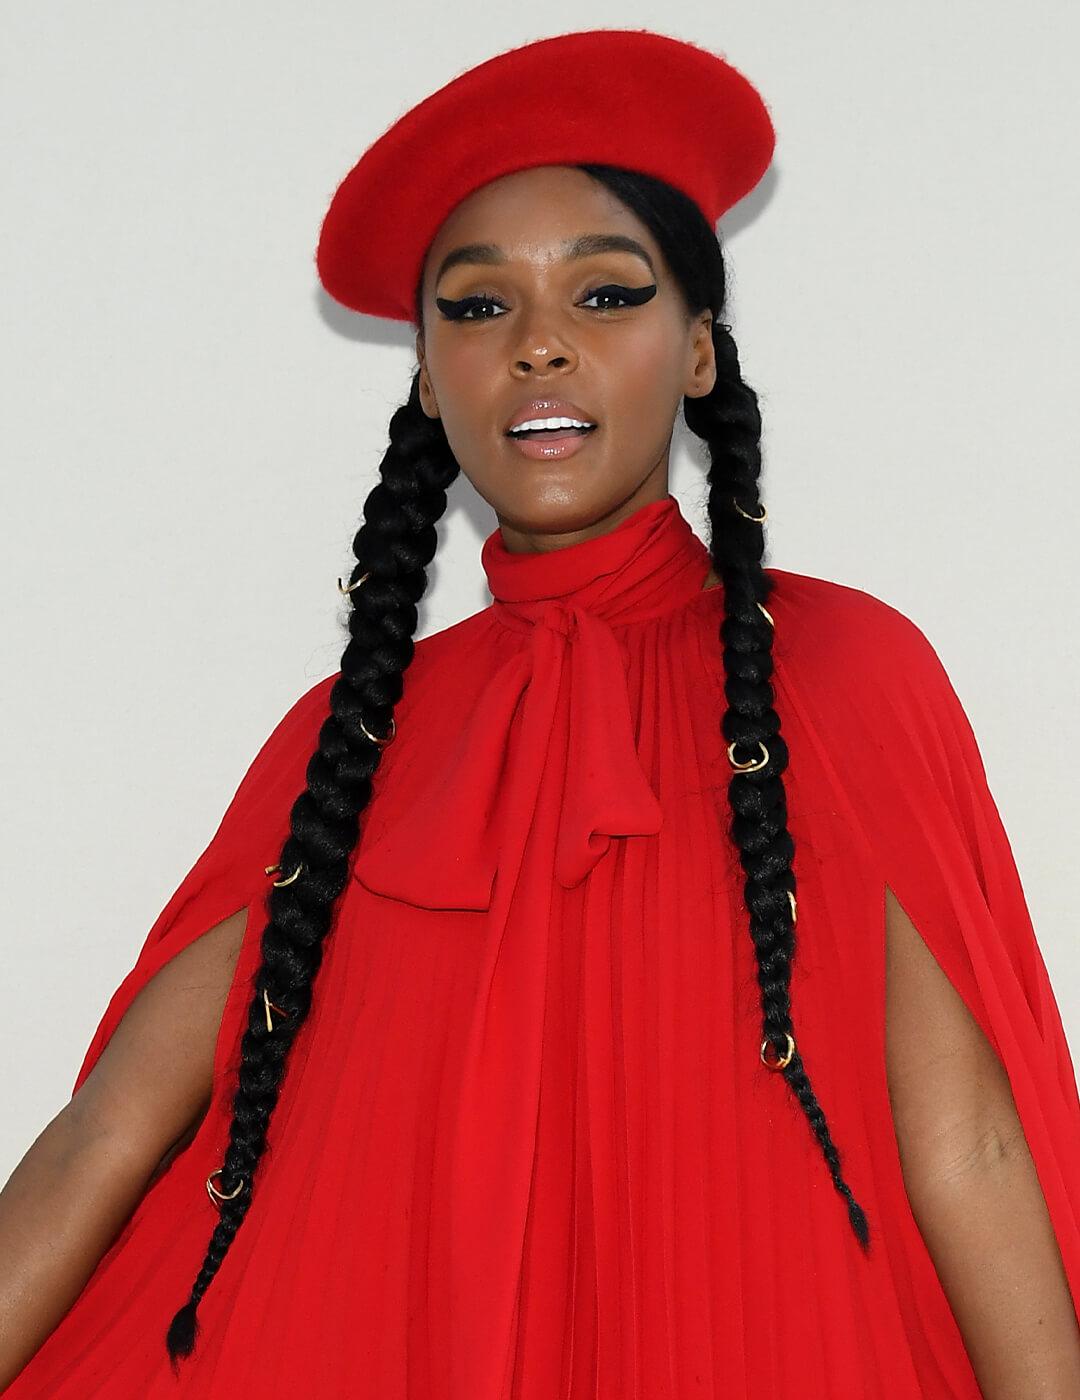 Janelle Monae going bold with a red dress, thick cat eye look, and braided pig tails with gold accents